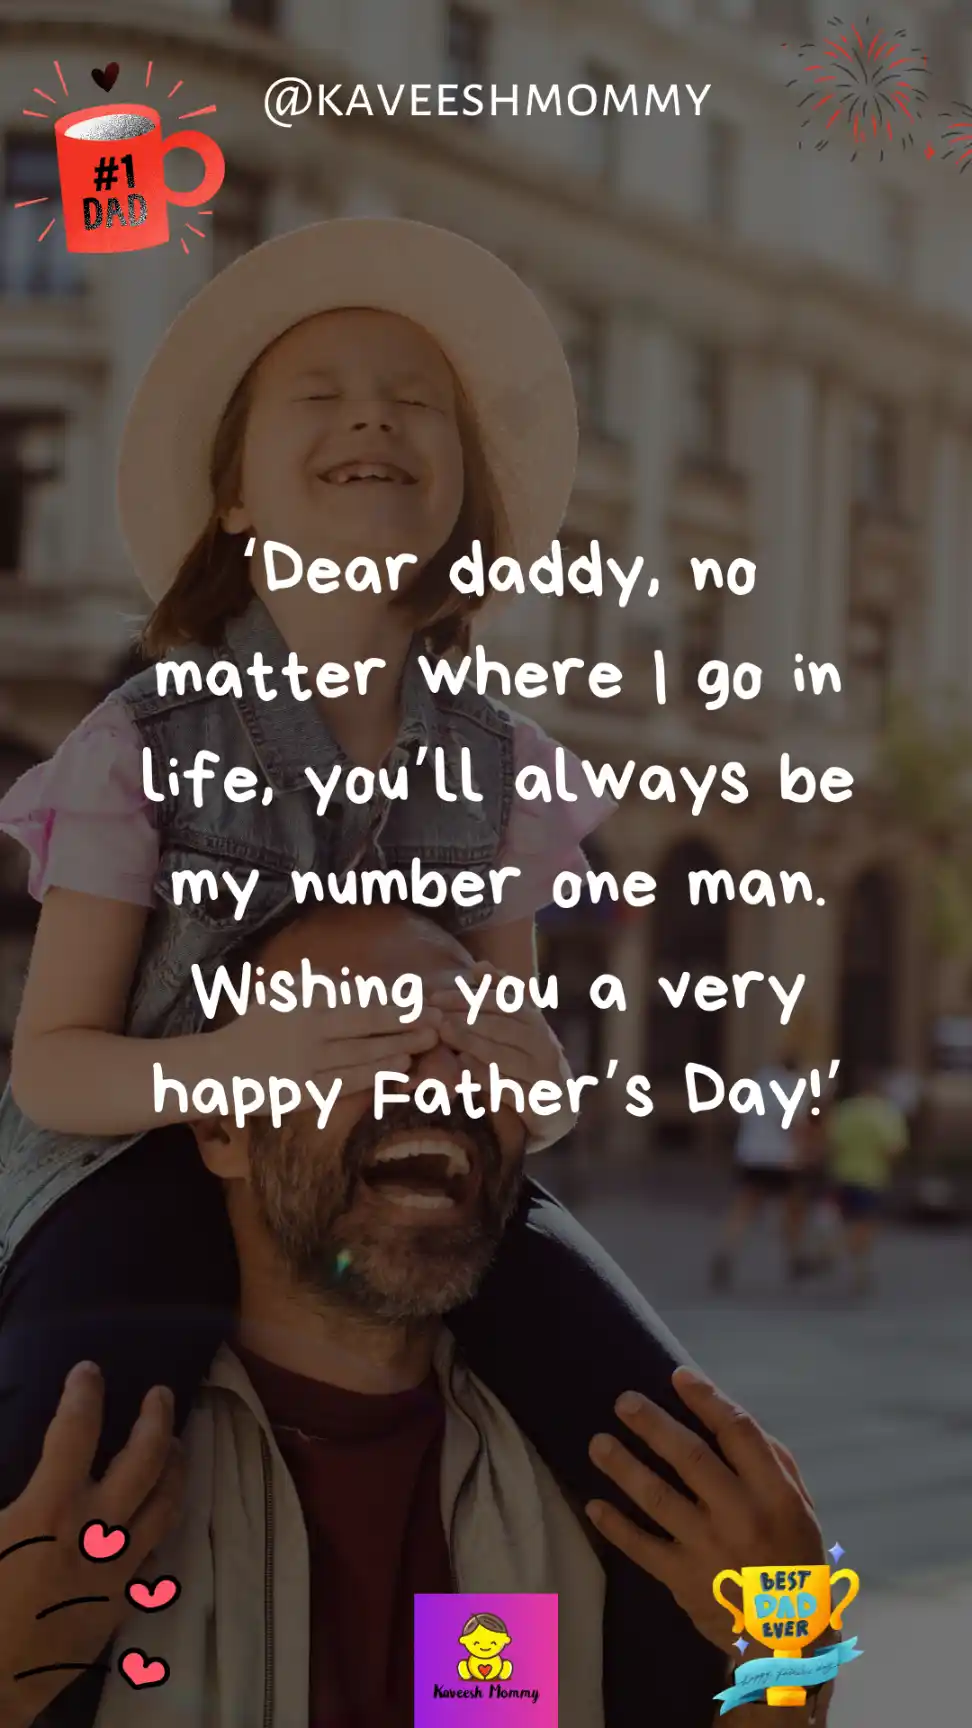 father's and daughters quotes-Happy Father’s Day Daddy! Wishing you a day that filled with as much love, joy, and happiness as you bring to my life every day.’